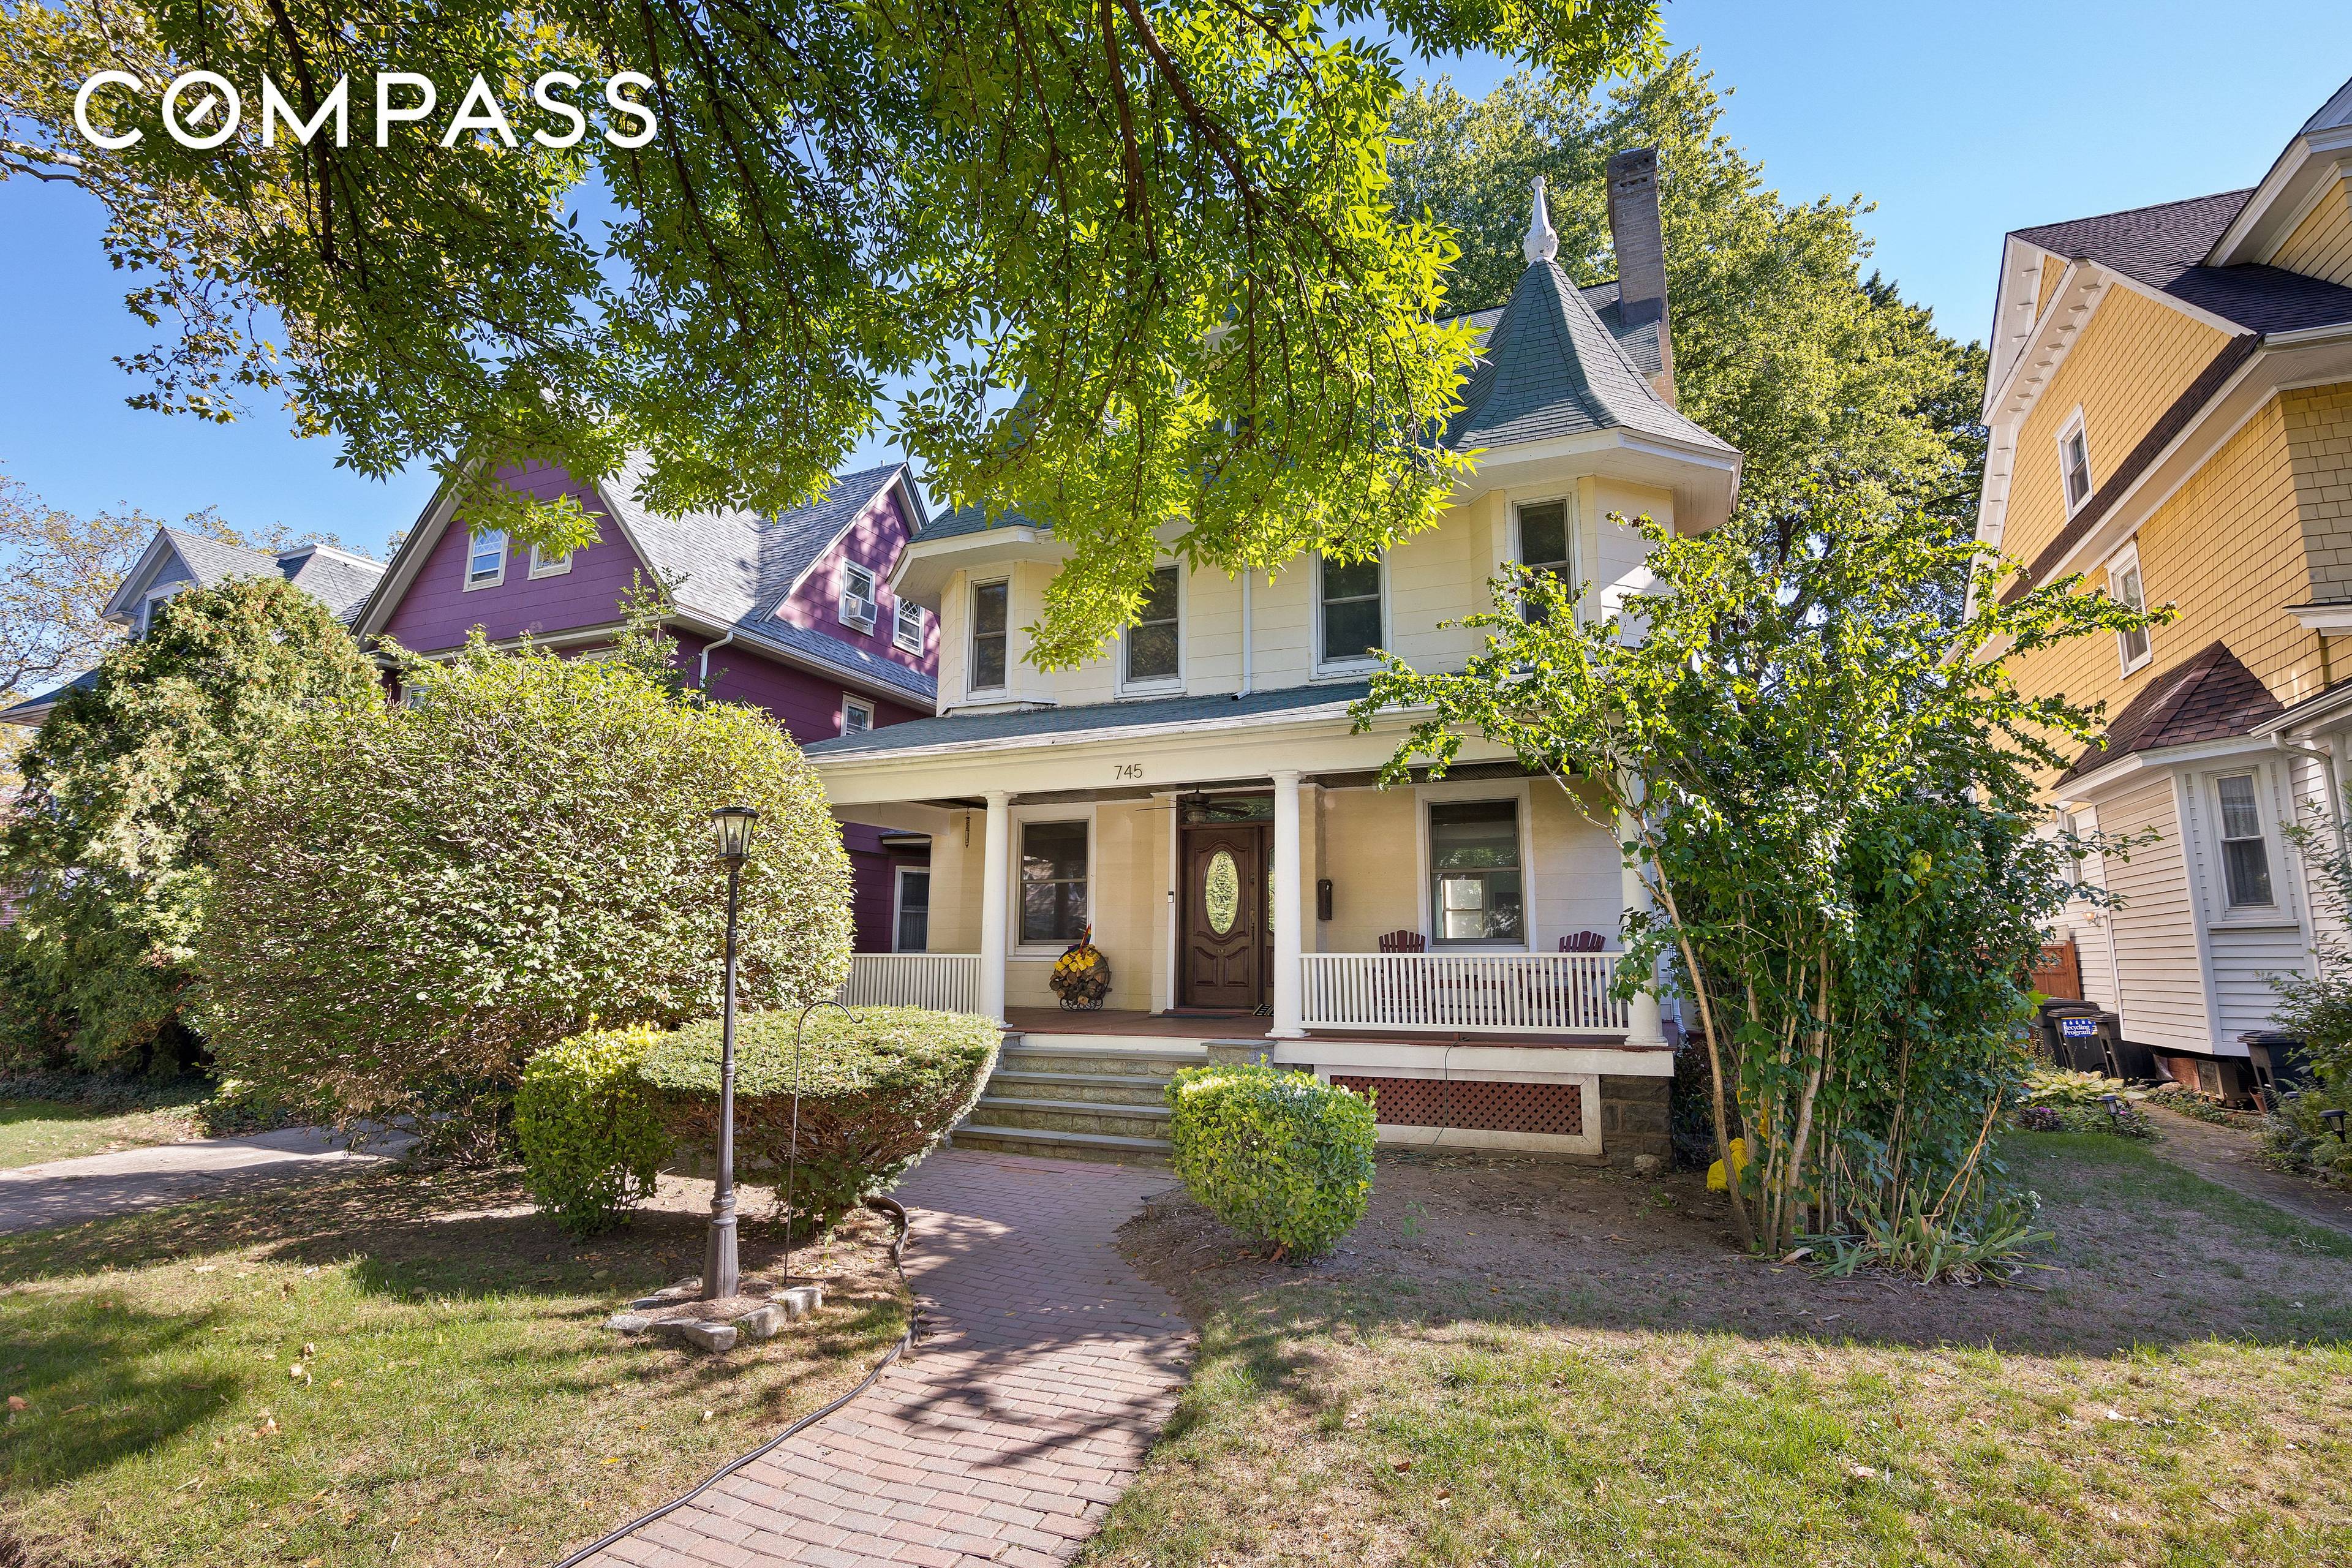 Located in West Midwood, nestled on a lovely, tree lined street.